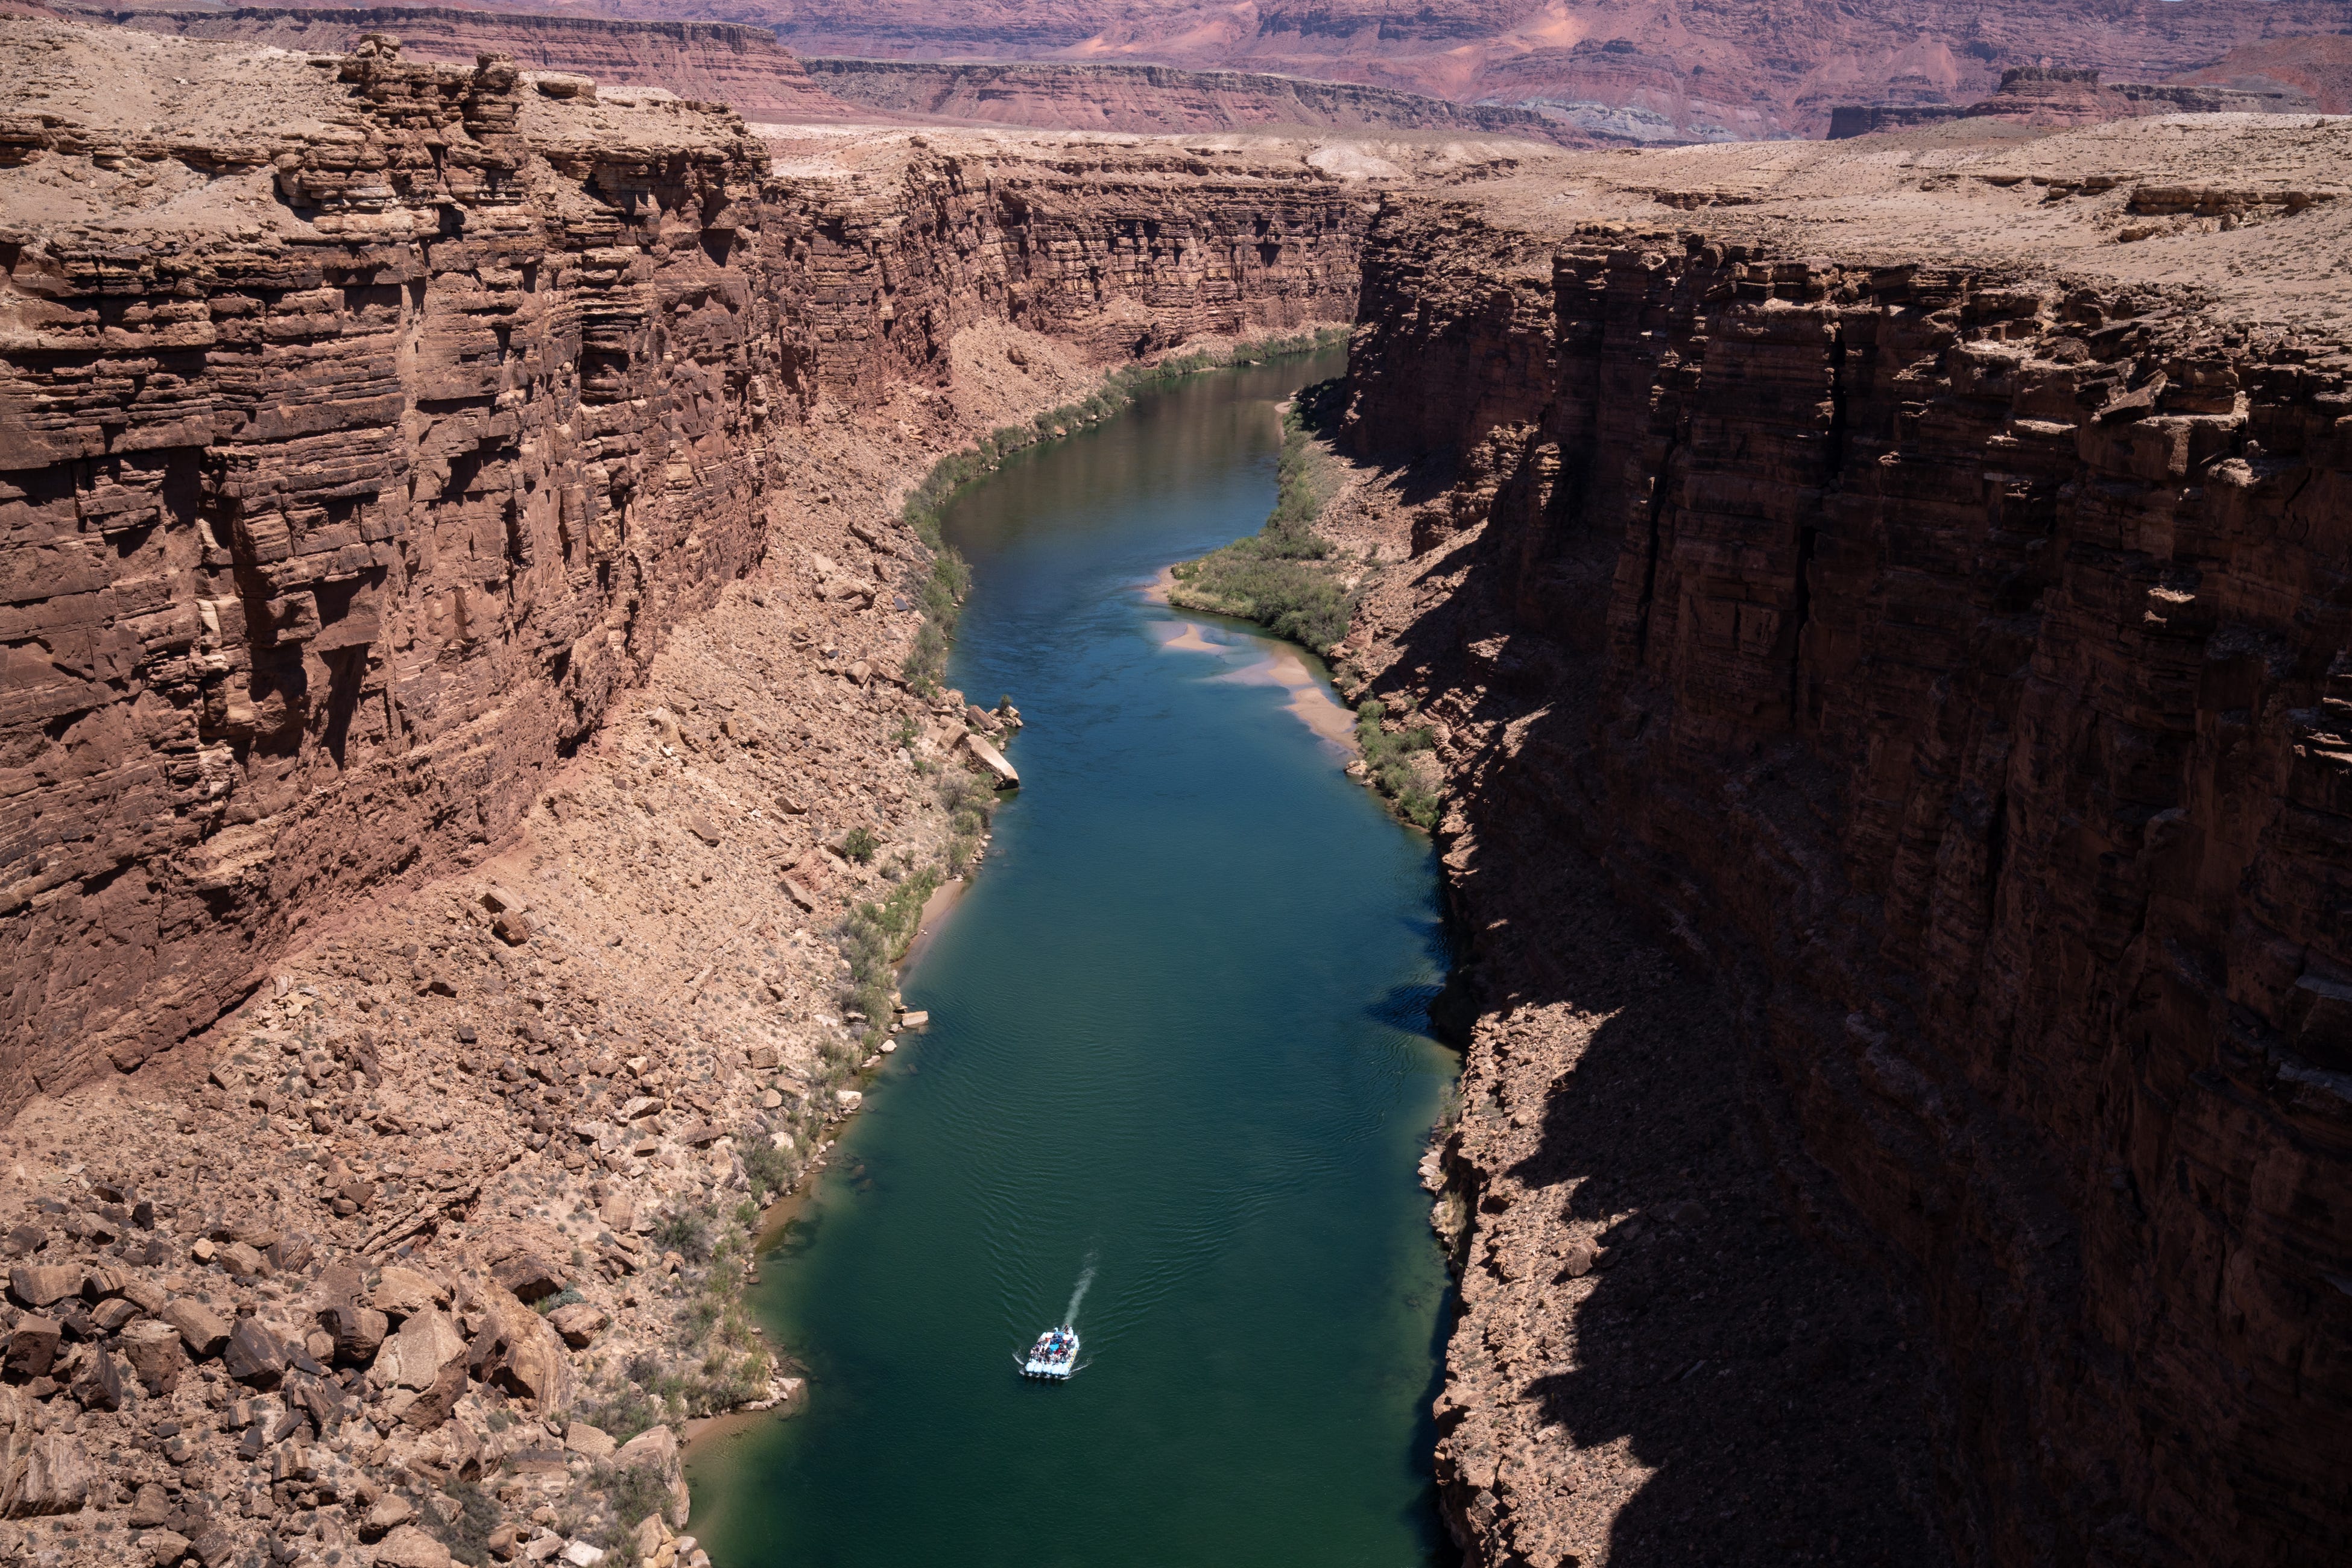 A raft floats down the Colorado River at the start of their journey through the Grand Canyon, May 25, 2022, Marble Canyon, Arizona.